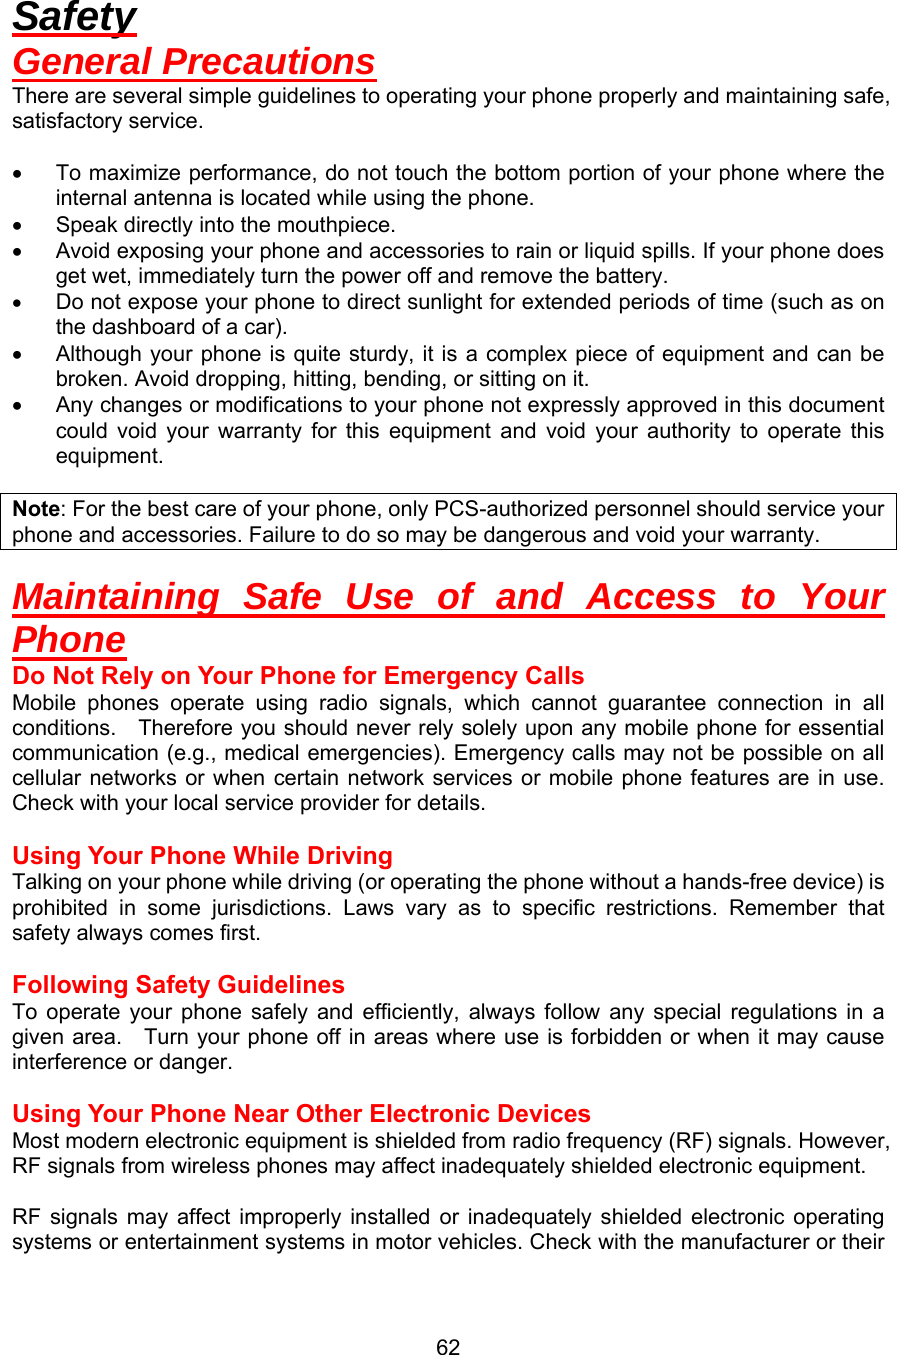 Safety General Precautions There are several simple guidelines to operating your phone properly and maintaining safe, satisfactory service.  •  To maximize performance, do not touch the bottom portion of your phone where the internal antenna is located while using the phone. •  Speak directly into the mouthpiece. •  Avoid exposing your phone and accessories to rain or liquid spills. If your phone does get wet, immediately turn the power off and remove the battery. •  Do not expose your phone to direct sunlight for extended periods of time (such as on the dashboard of a car). •  Although your phone is quite sturdy, it is a complex piece of equipment and can be broken. Avoid dropping, hitting, bending, or sitting on it. •  Any changes or modifications to your phone not expressly approved in this document could void your warranty for this equipment and void your authority to operate this equipment.  Note: For the best care of your phone, only PCS-authorized personnel should service your phone and accessories. Failure to do so may be dangerous and void your warranty.  Maintaining Safe Use of and Access to Your Phone Do Not Rely on Your Phone for Emergency Calls Mobile phones operate using radio signals, which cannot guarantee connection in all conditions.    Therefore you should never rely solely upon any mobile phone for essential communication (e.g., medical emergencies). Emergency calls may not be possible on all cellular networks or when certain network services or mobile phone features are in use. Check with your local service provider for details.  Using Your Phone While Driving Talking on your phone while driving (or operating the phone without a hands-free device) is prohibited in some jurisdictions. Laws vary as to specific restrictions. Remember that safety always comes first.  Following Safety Guidelines To operate your phone safely and efficiently, always follow any special regulations in a given area.    Turn your phone off in areas where use is forbidden or when it may cause interference or danger.  Using Your Phone Near Other Electronic Devices Most modern electronic equipment is shielded from radio frequency (RF) signals. However, RF signals from wireless phones may affect inadequately shielded electronic equipment.    RF signals may affect improperly installed or inadequately shielded electronic operating systems or entertainment systems in motor vehicles. Check with the manufacturer or their  62